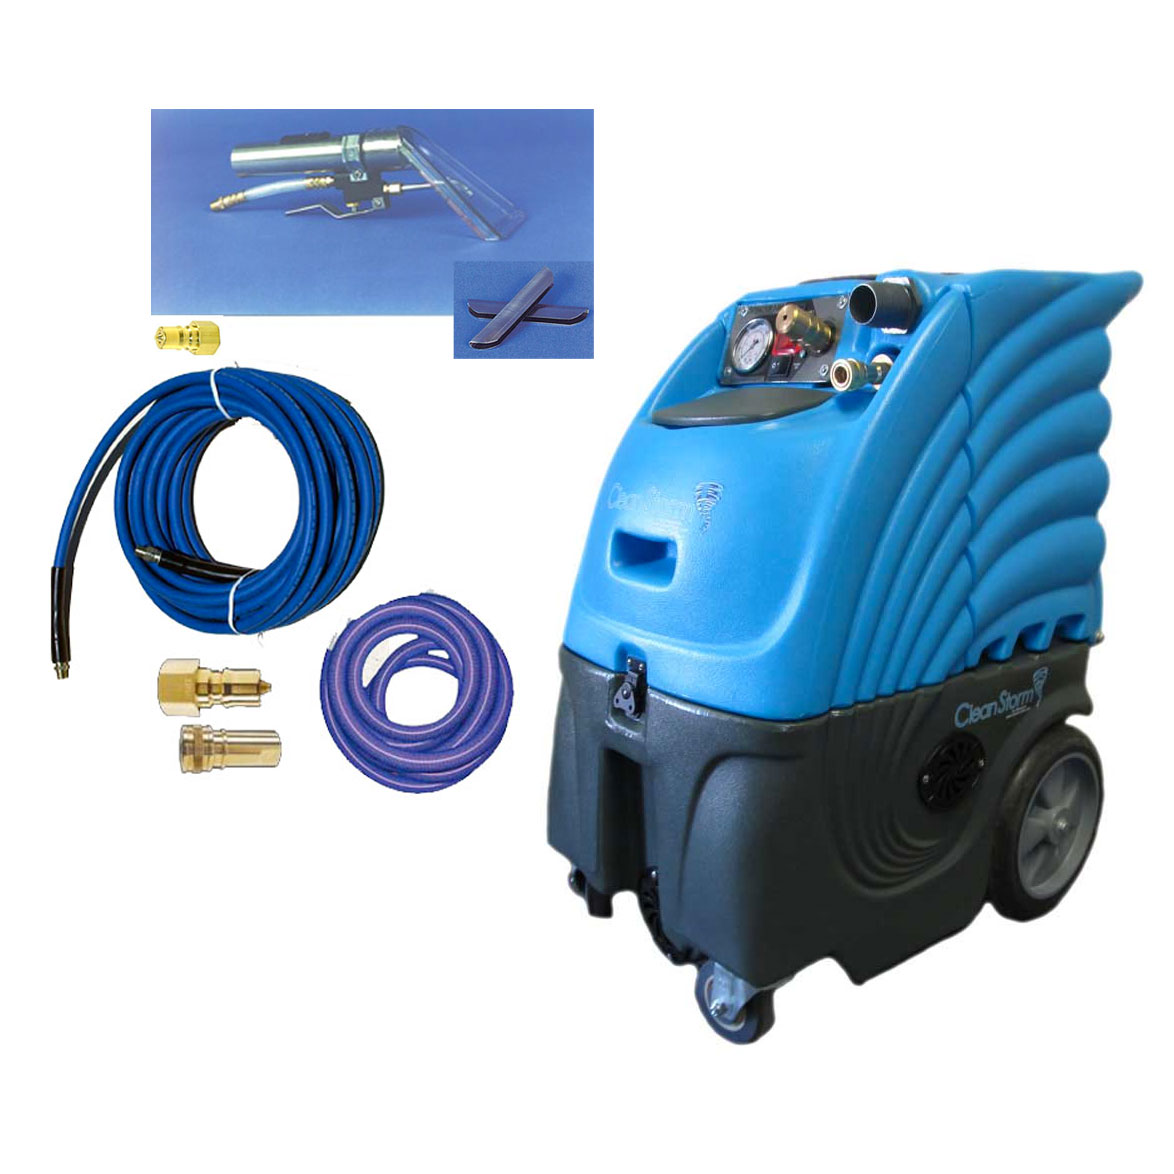 Clean Storm 6gal 300psi HEATED Dual 2 Stage Vacs, Hose Set Wand Upholstery Carpet Cleaning Machine, 6-2300-H Set Bundle